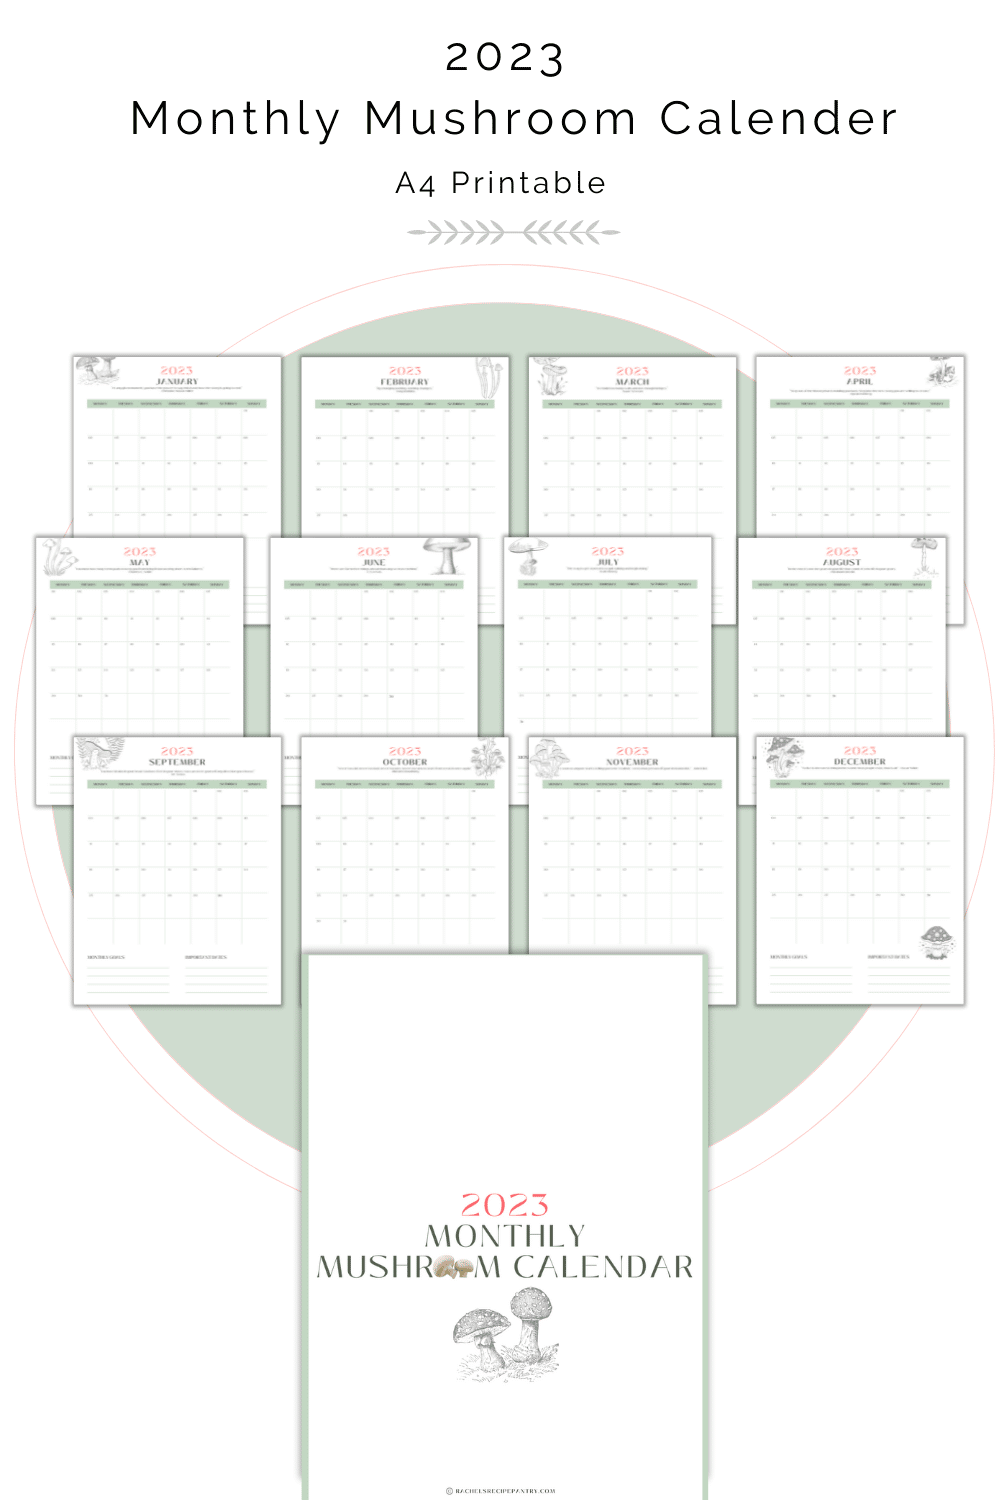 monthly printable calendar for 2023 a4 with mushroom art